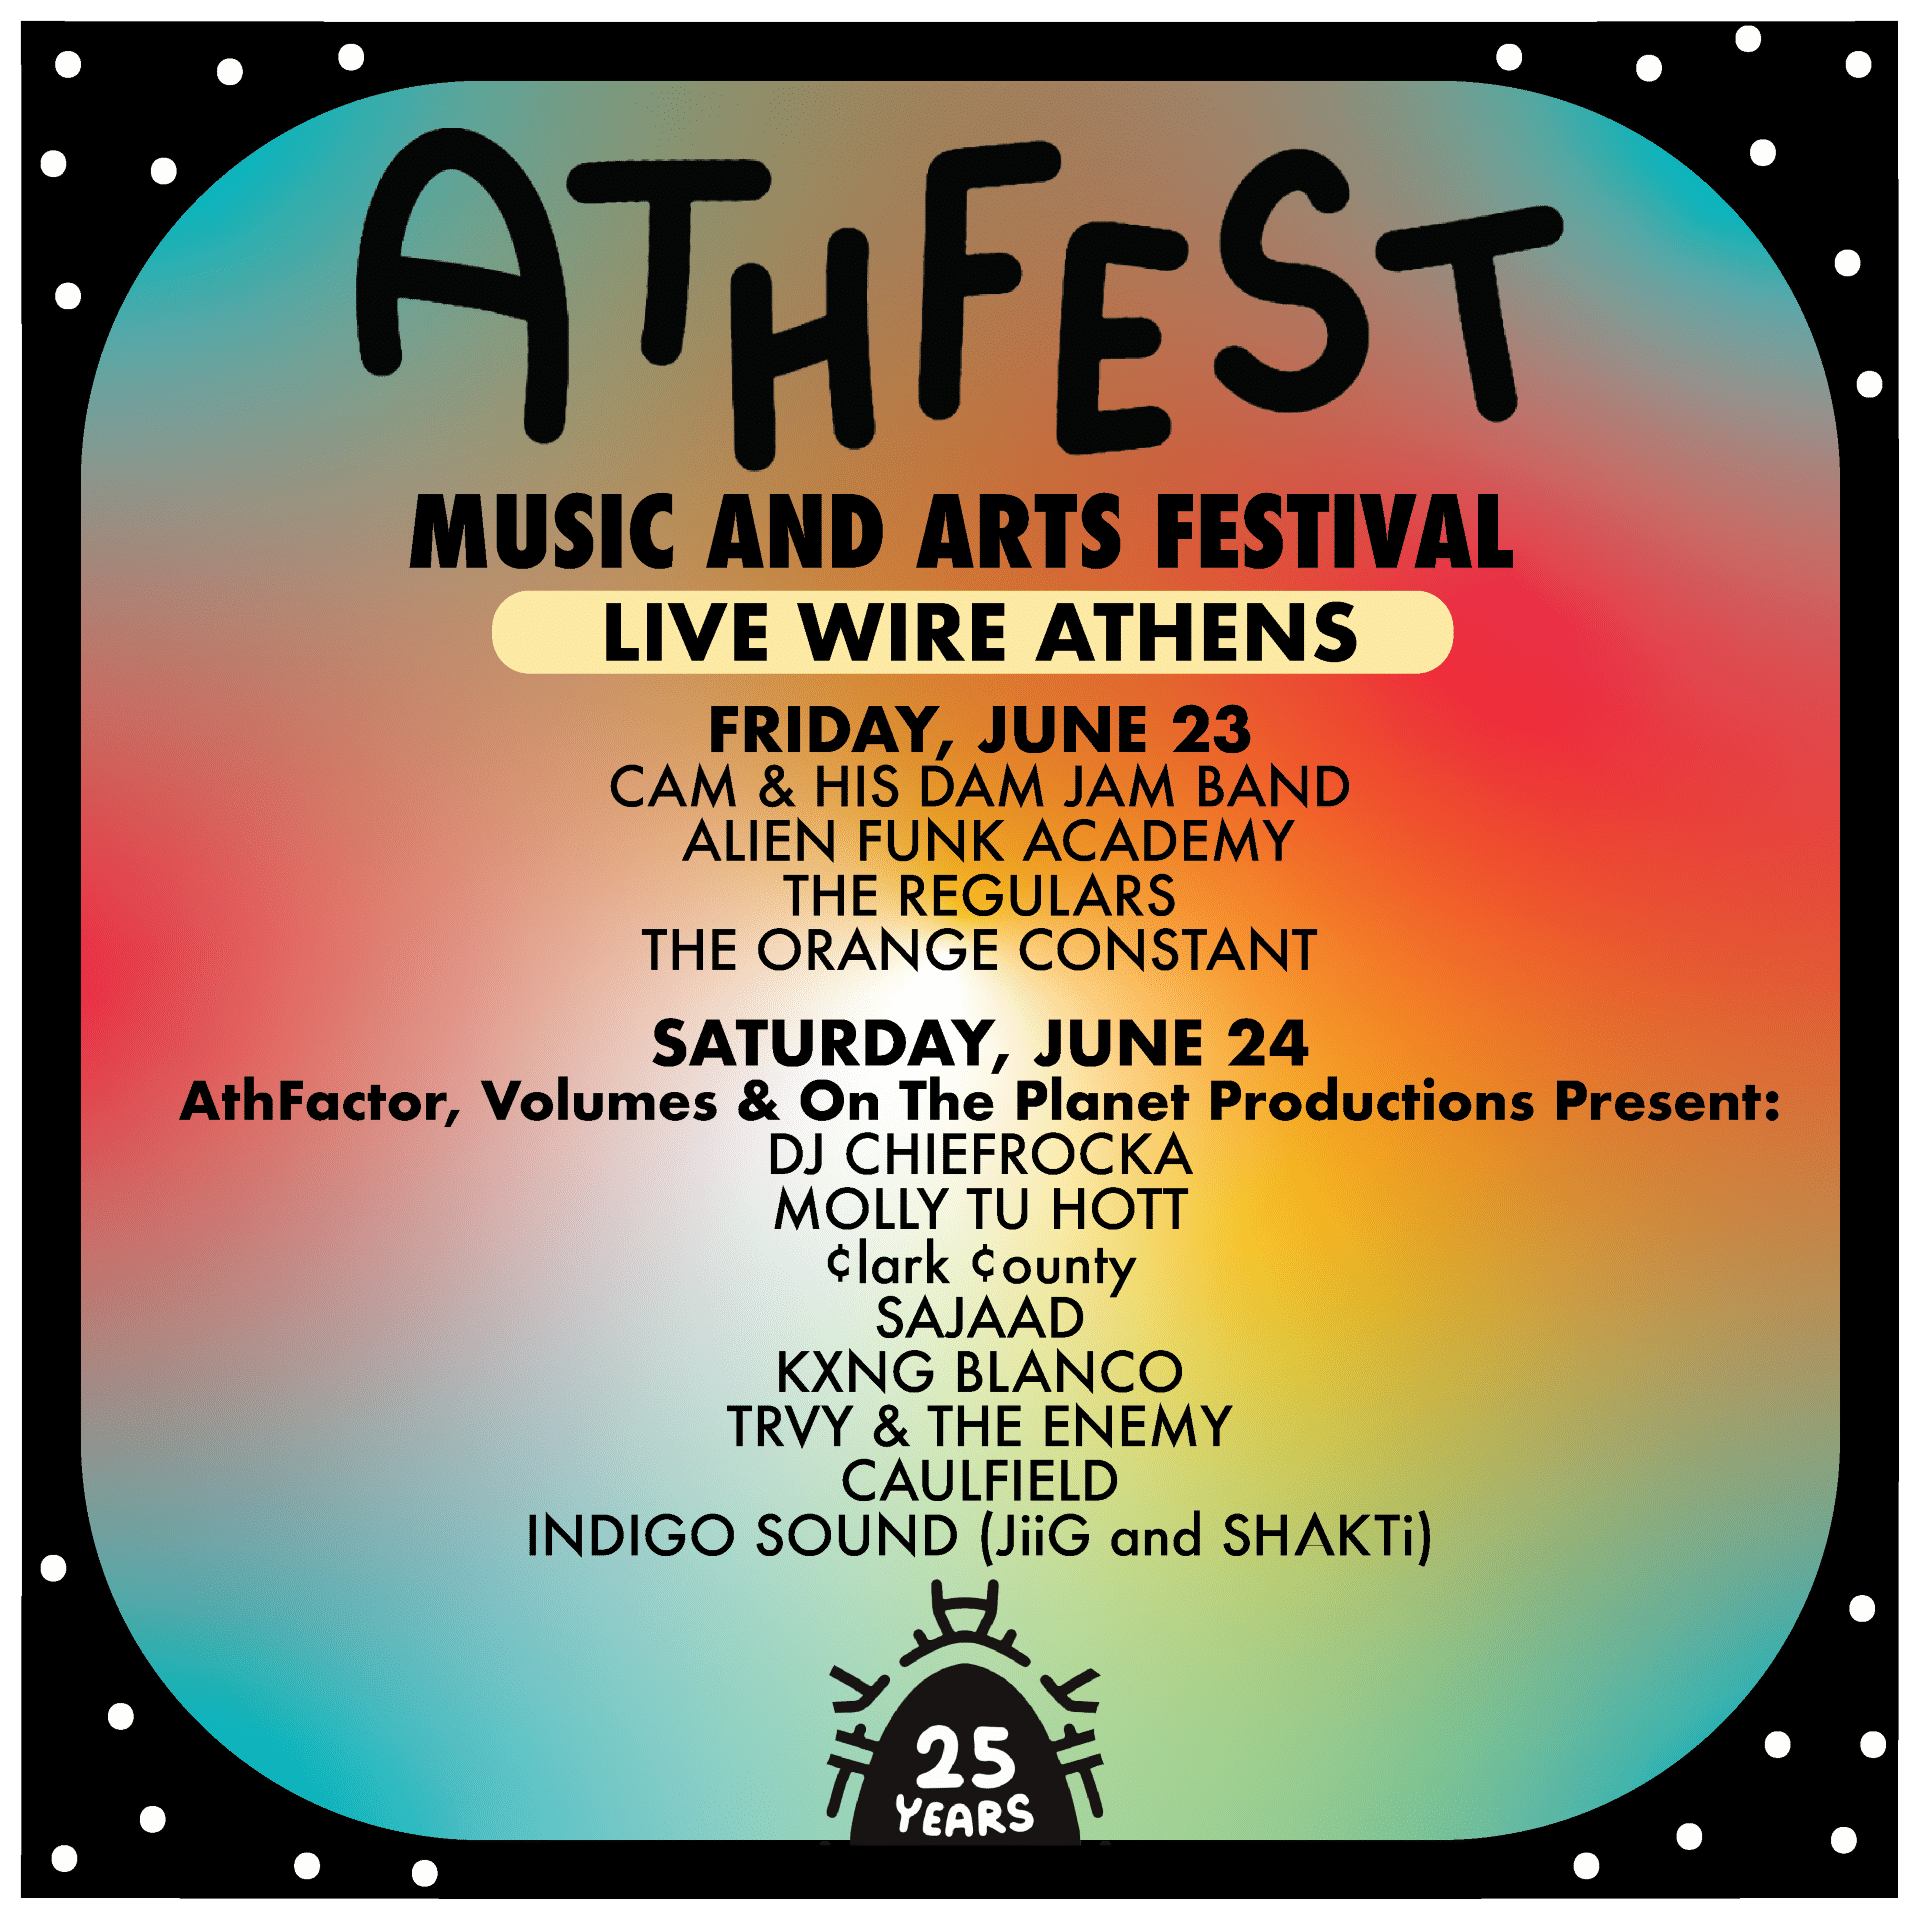 Live Wire Athens - AthFest